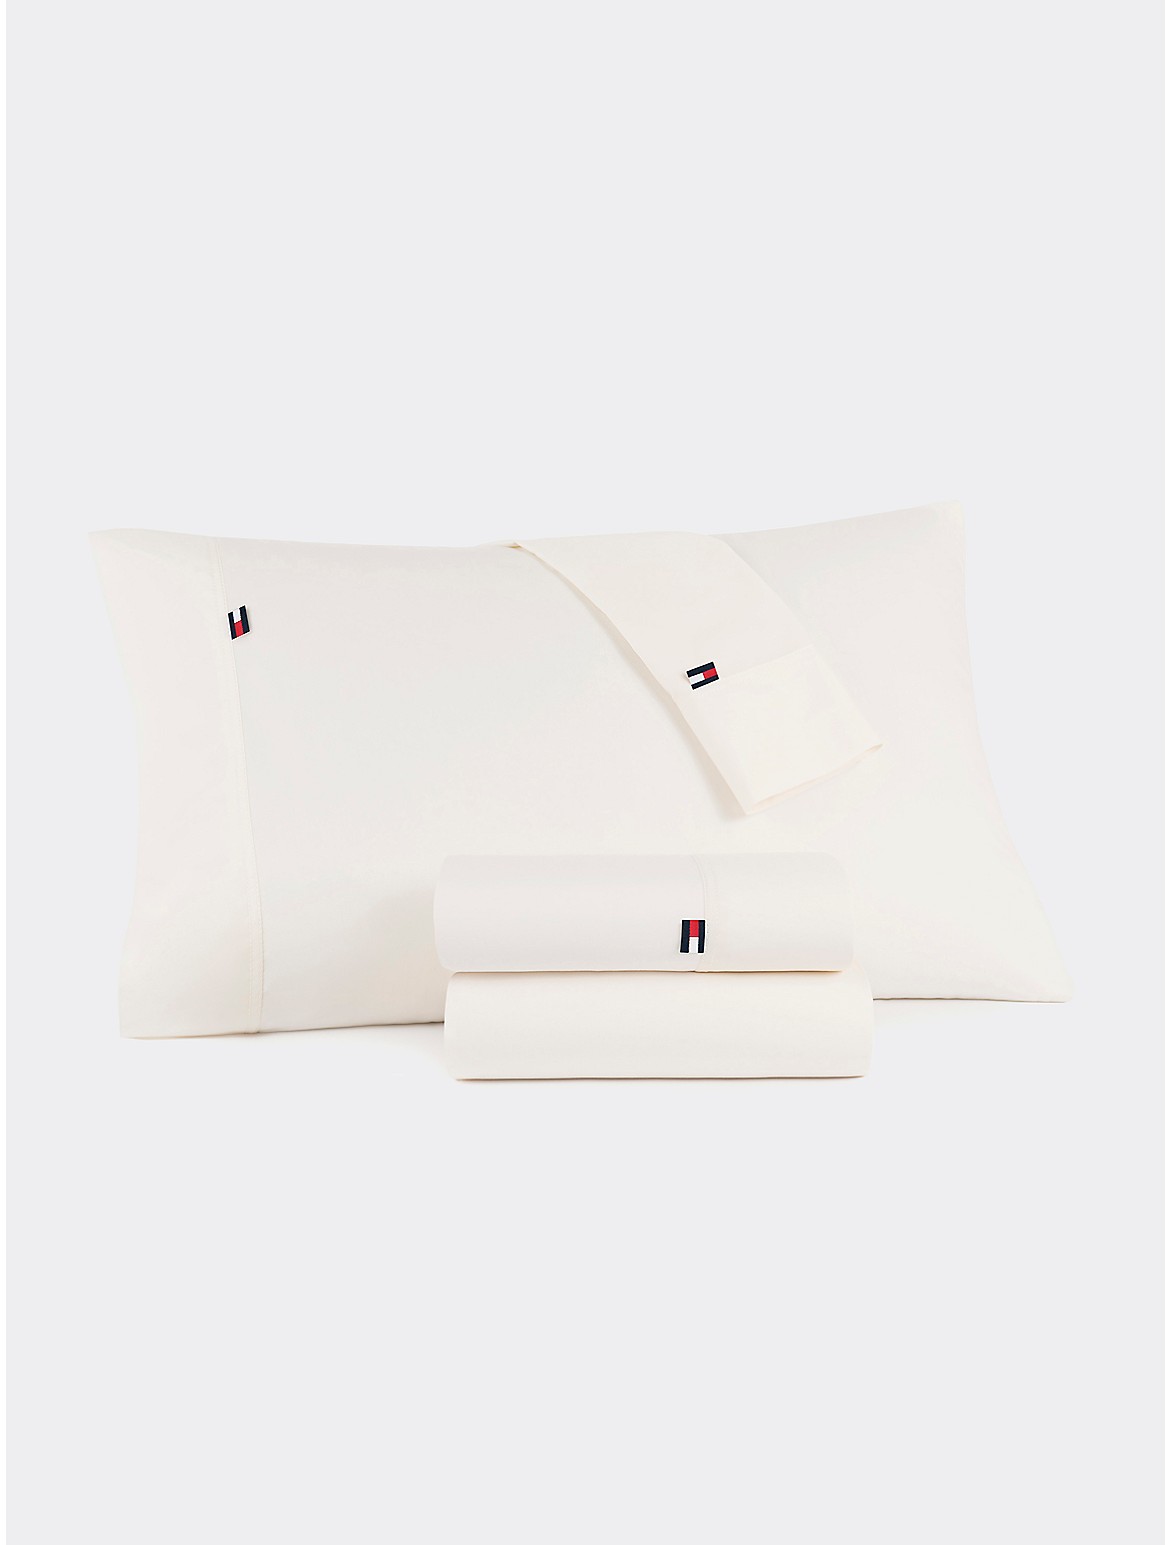 Tommy Hilfiger Signature Solid Light Beige Pillowcase Set - White - KING